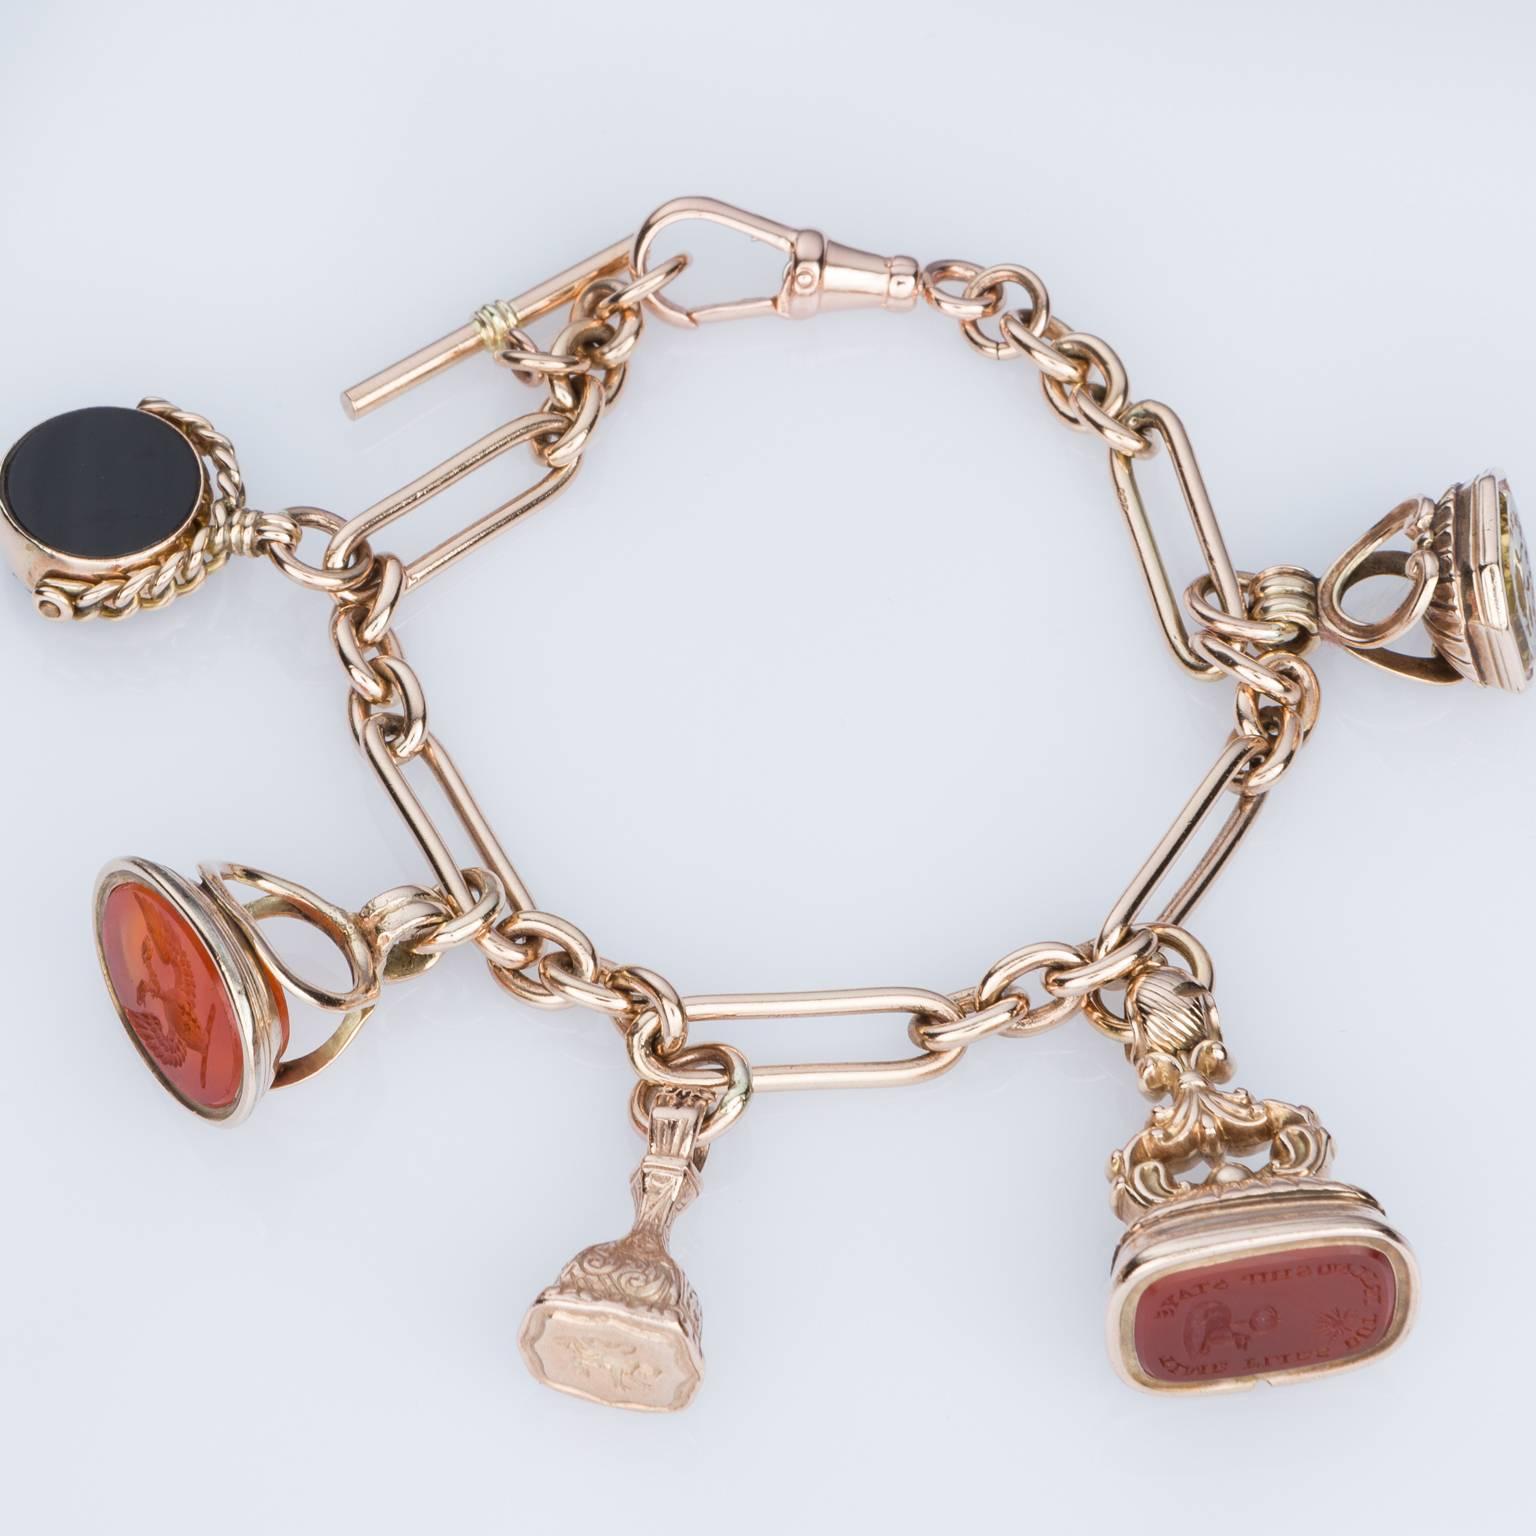 Looking for a piece that has some real history? Then this gorgeous bracelet is for you. A 9k rose gold paperclip link bracelet with T – bar & 5 vintage charms. Bracelet measures 20cm in length with attached swivel clasp.
Charms consist of:
1 x Onyx/